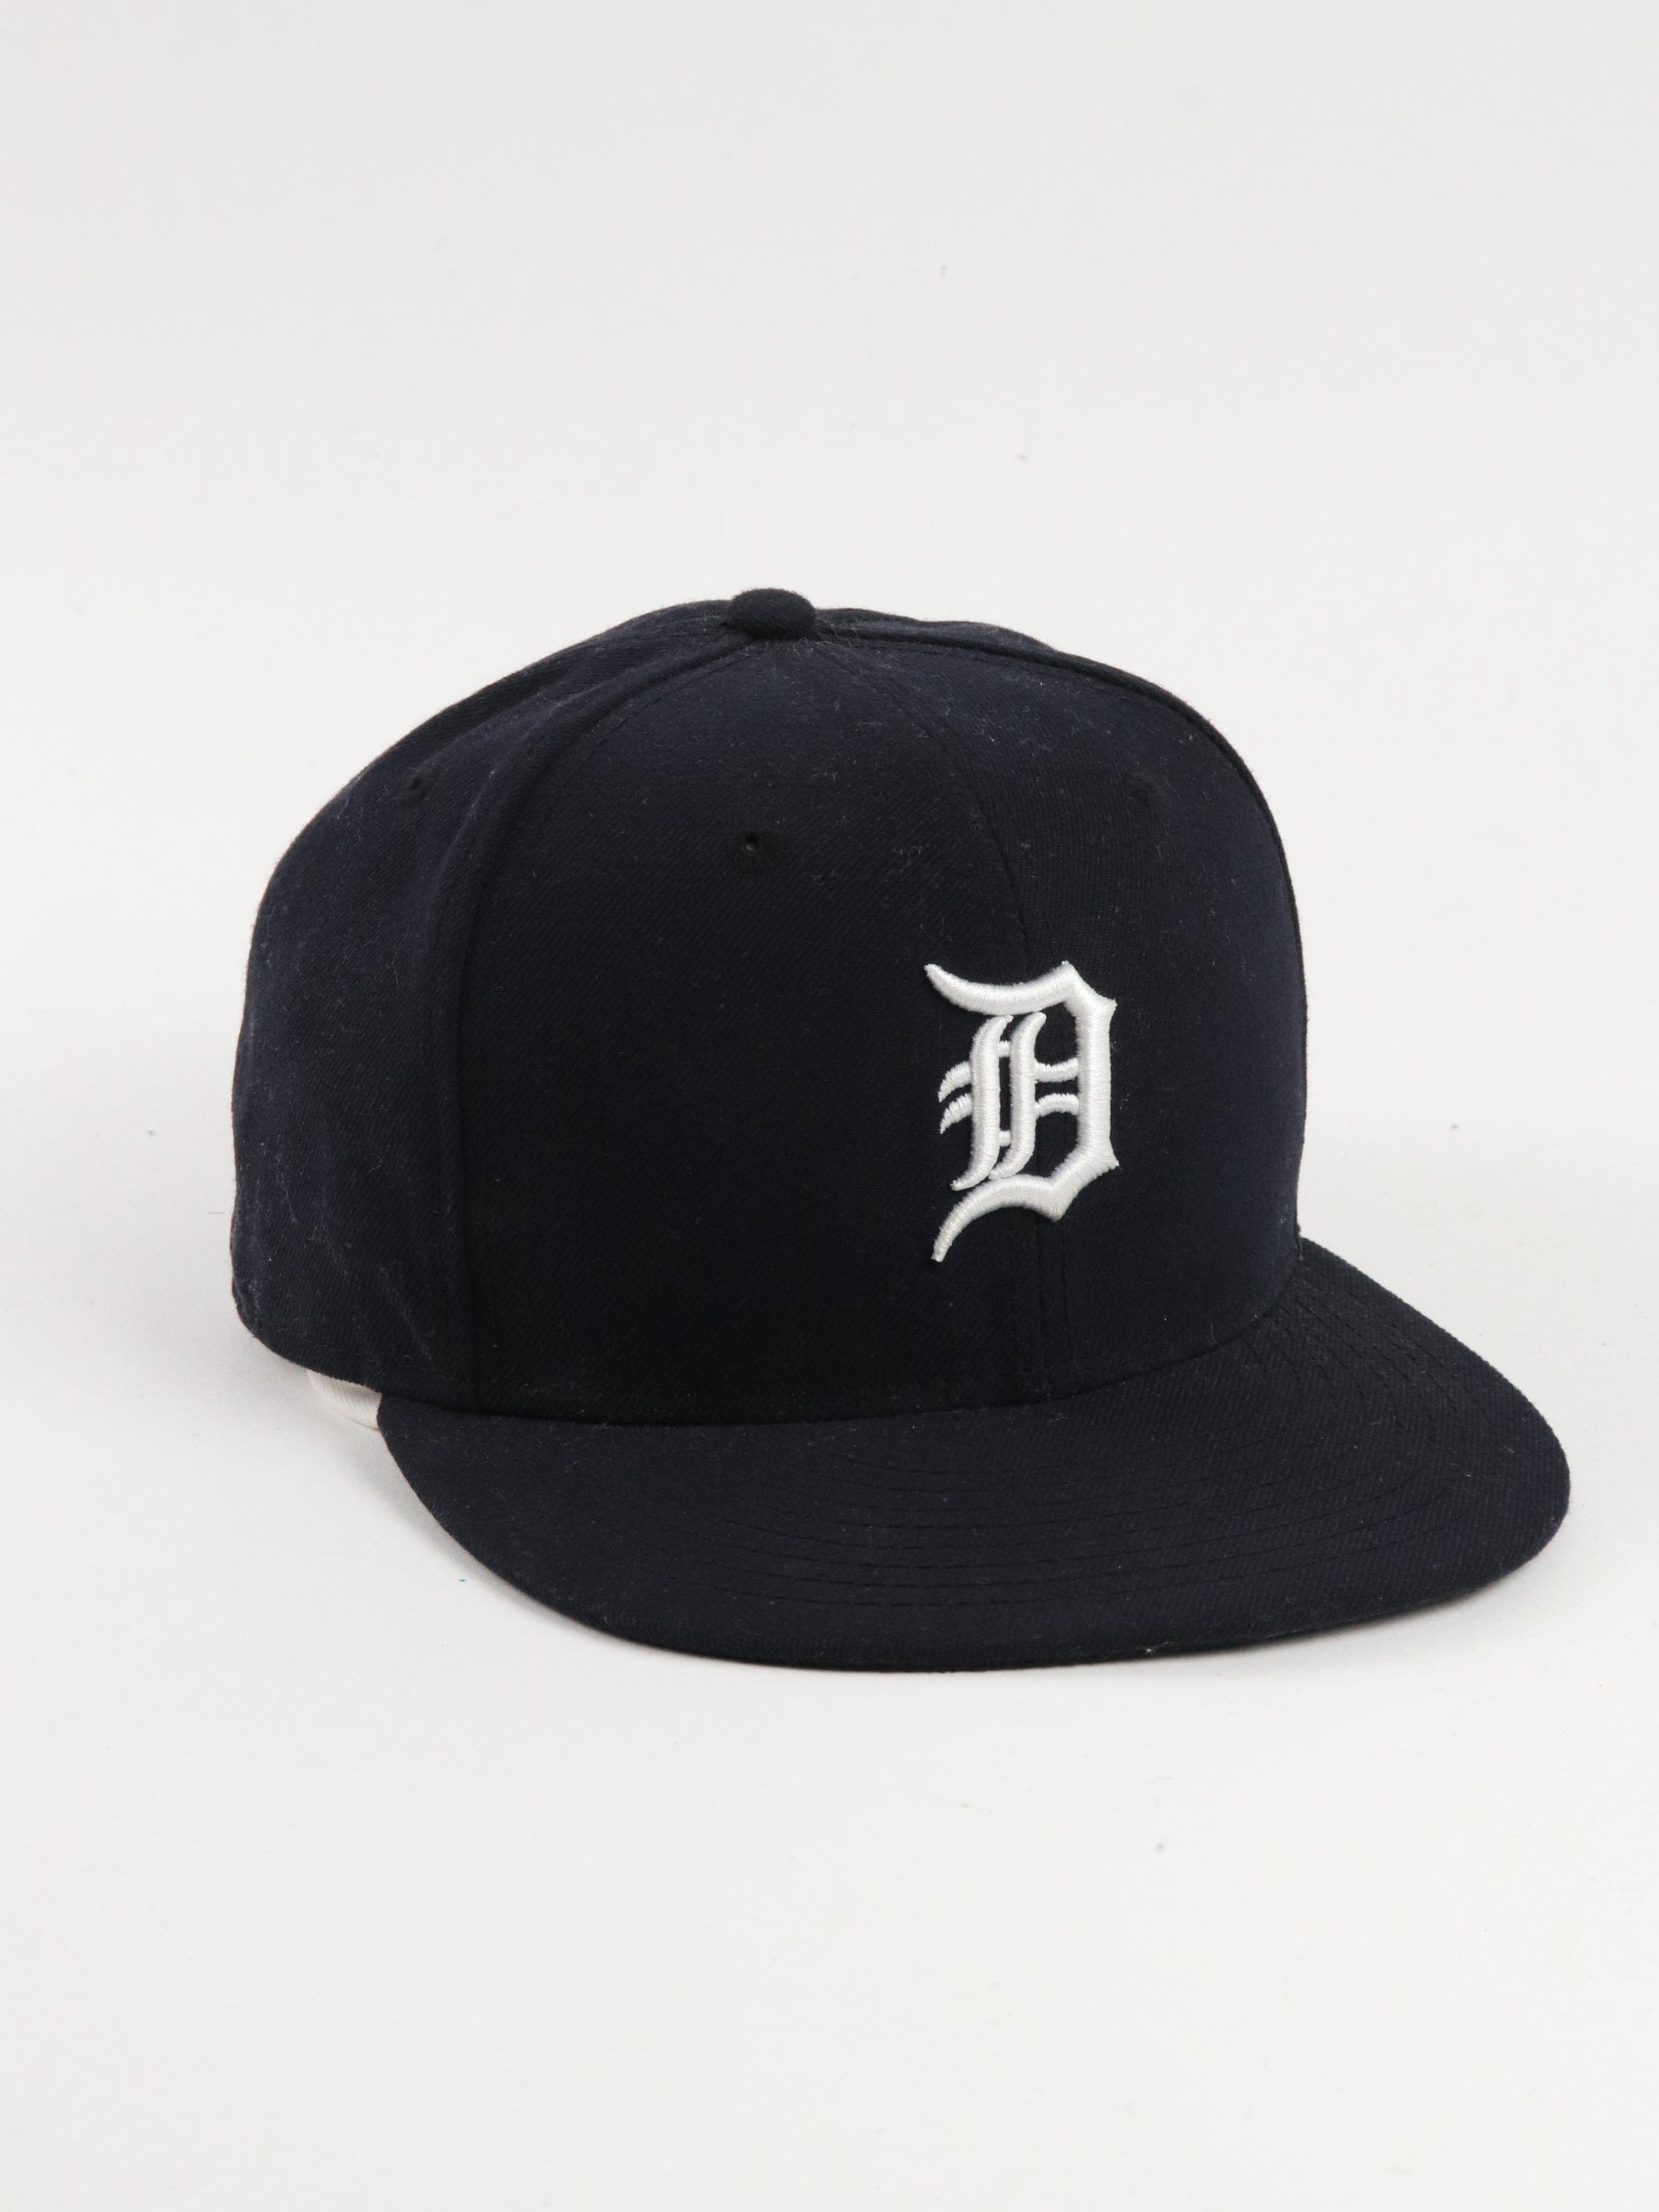 Detroit Tigers Home Hat Ranked #1 By USA Today - CBS Detroit